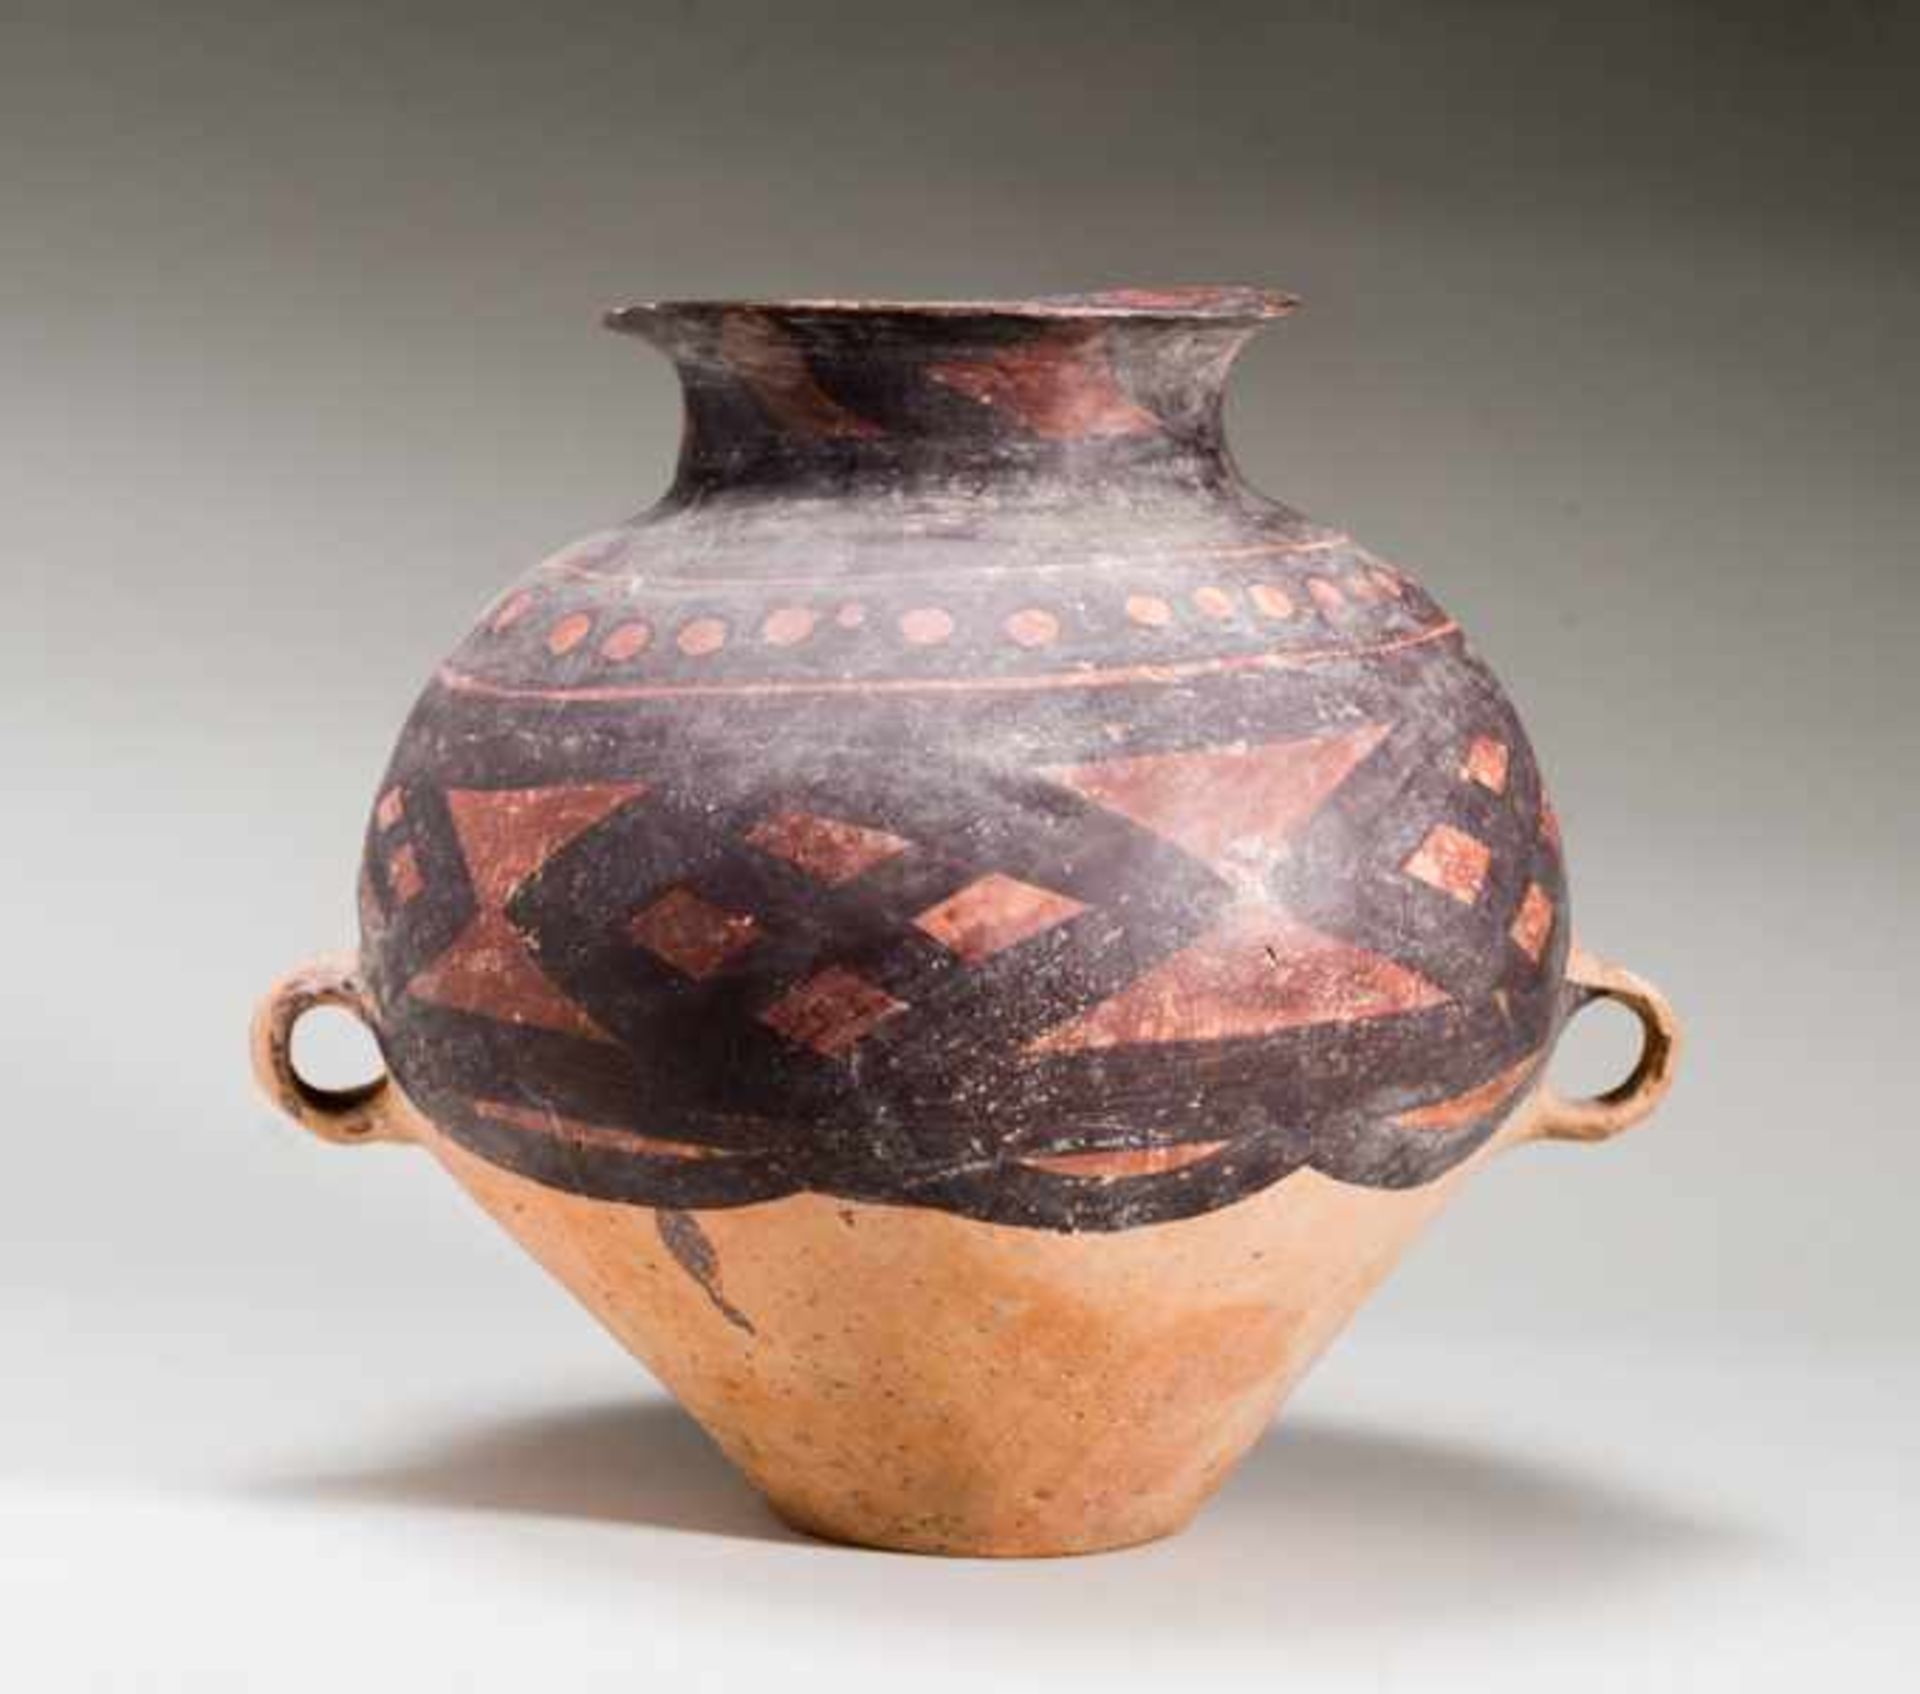 LARGE VESSEL Terracotta with original painting. China, Yangshaoculture, Majiayao, 4th - 3rd